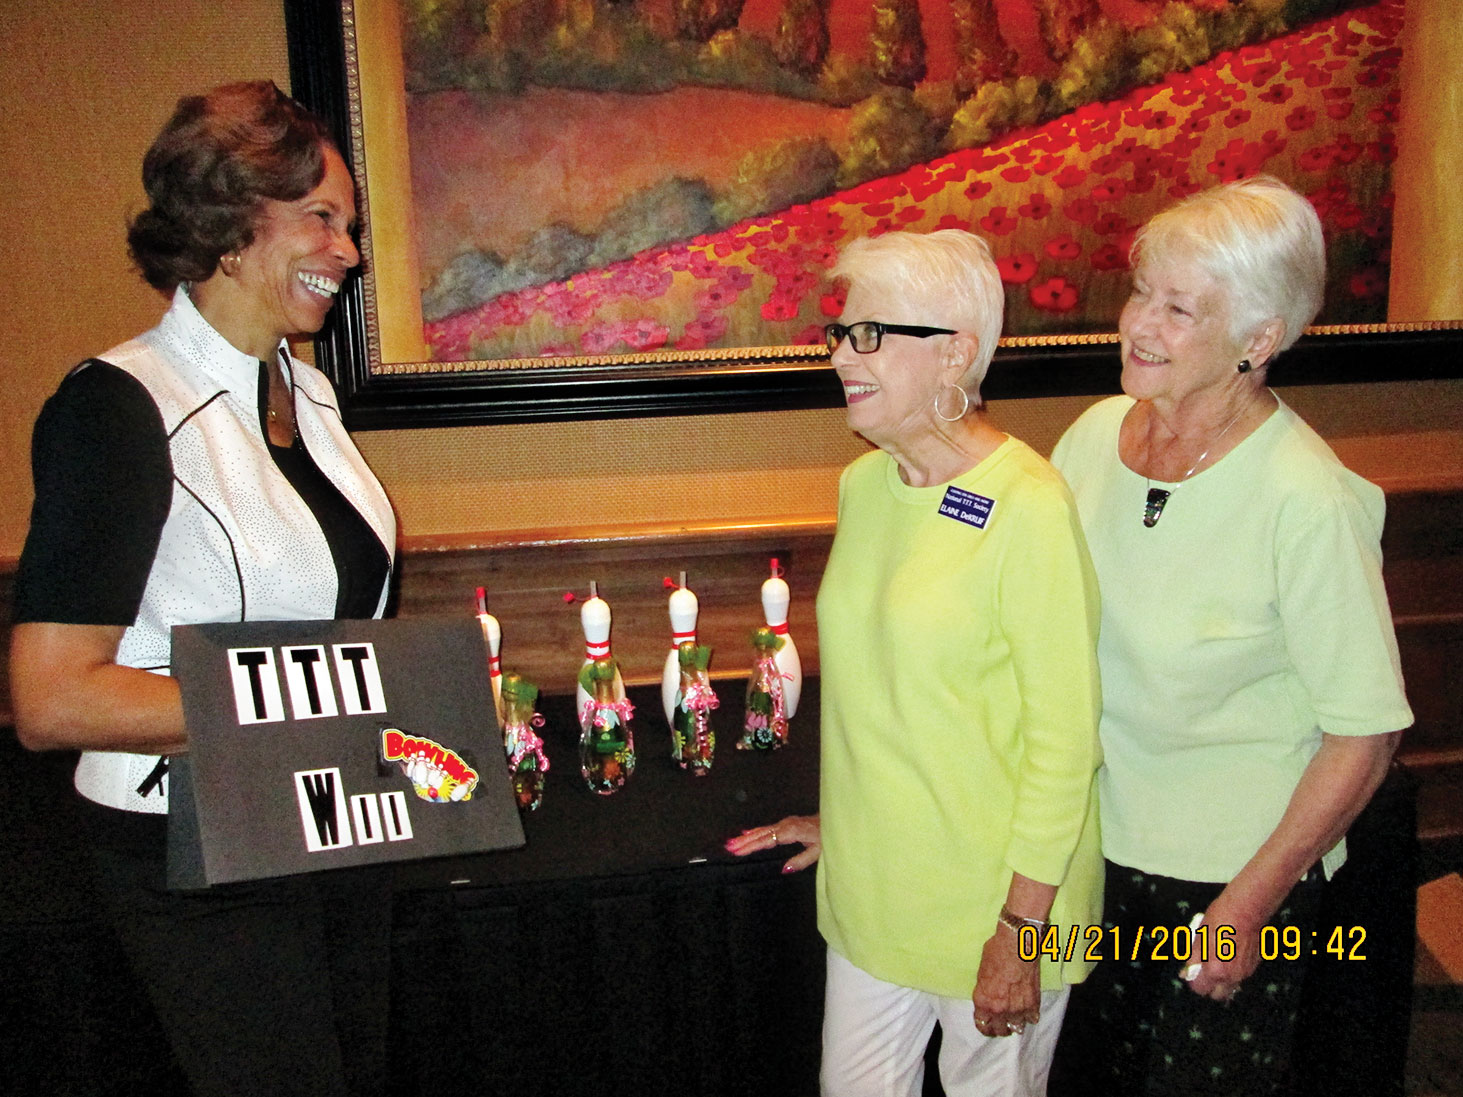 Wii bowling coach Bonita Sims shows prizes to event chairmen Elaine DeKruif and Dolores Rippe.